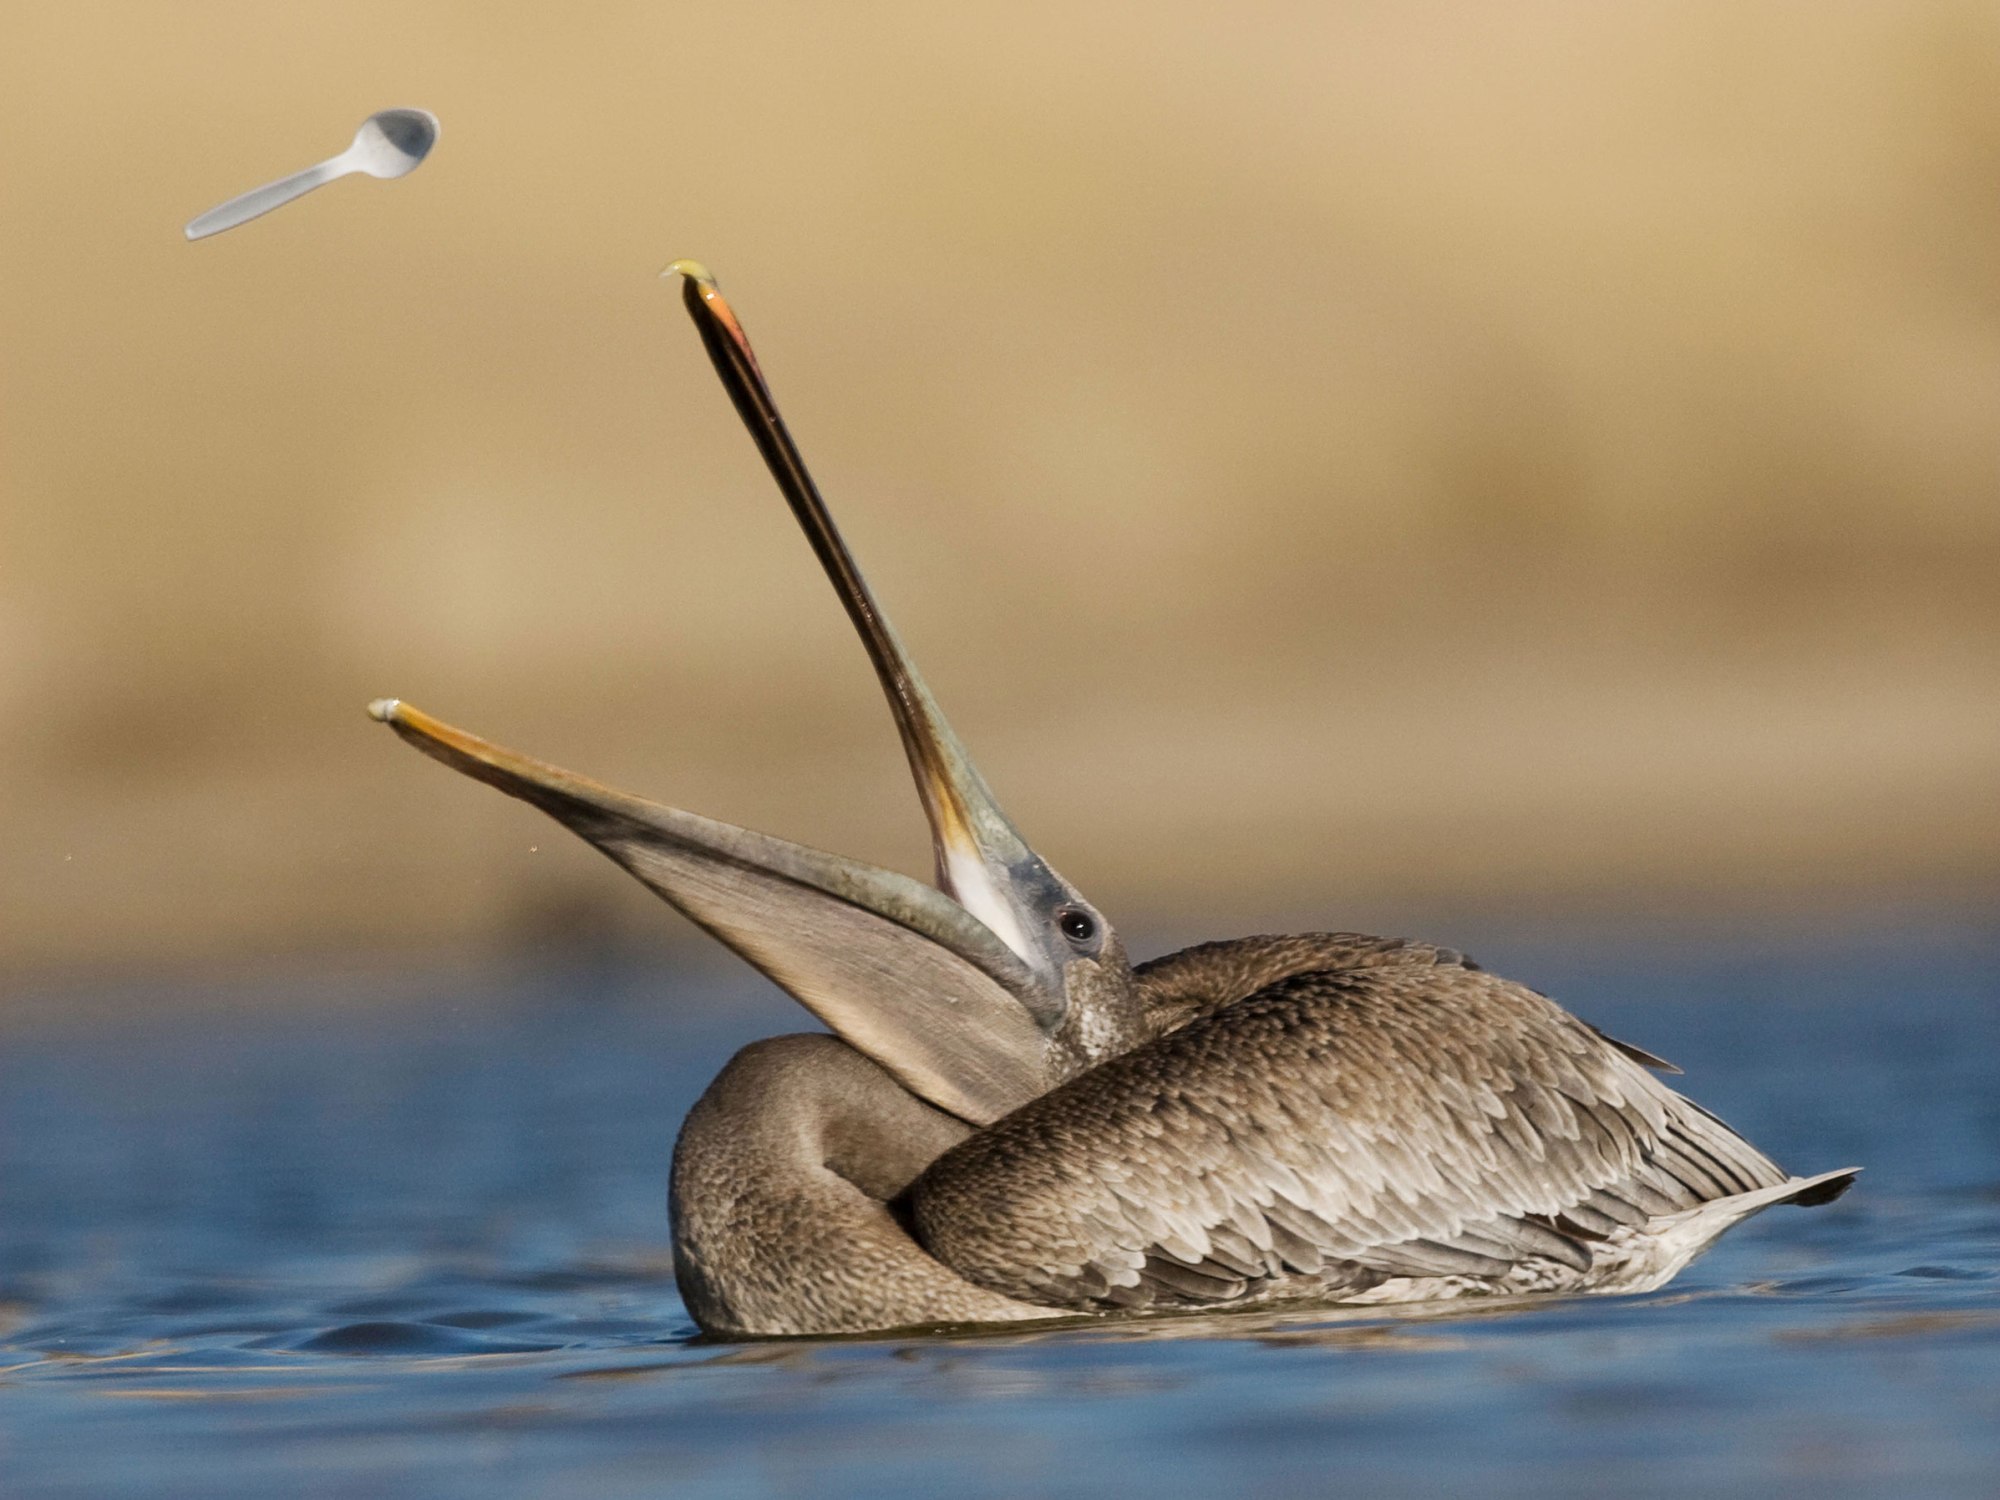 Brown Pelican juvenile tossing plastic spoon up in the air. Photo: Sebastian Kennerknecht, Minden Pictures from Audubon article: "Eight Easy Ways to Reduce Your Plastic Waste"